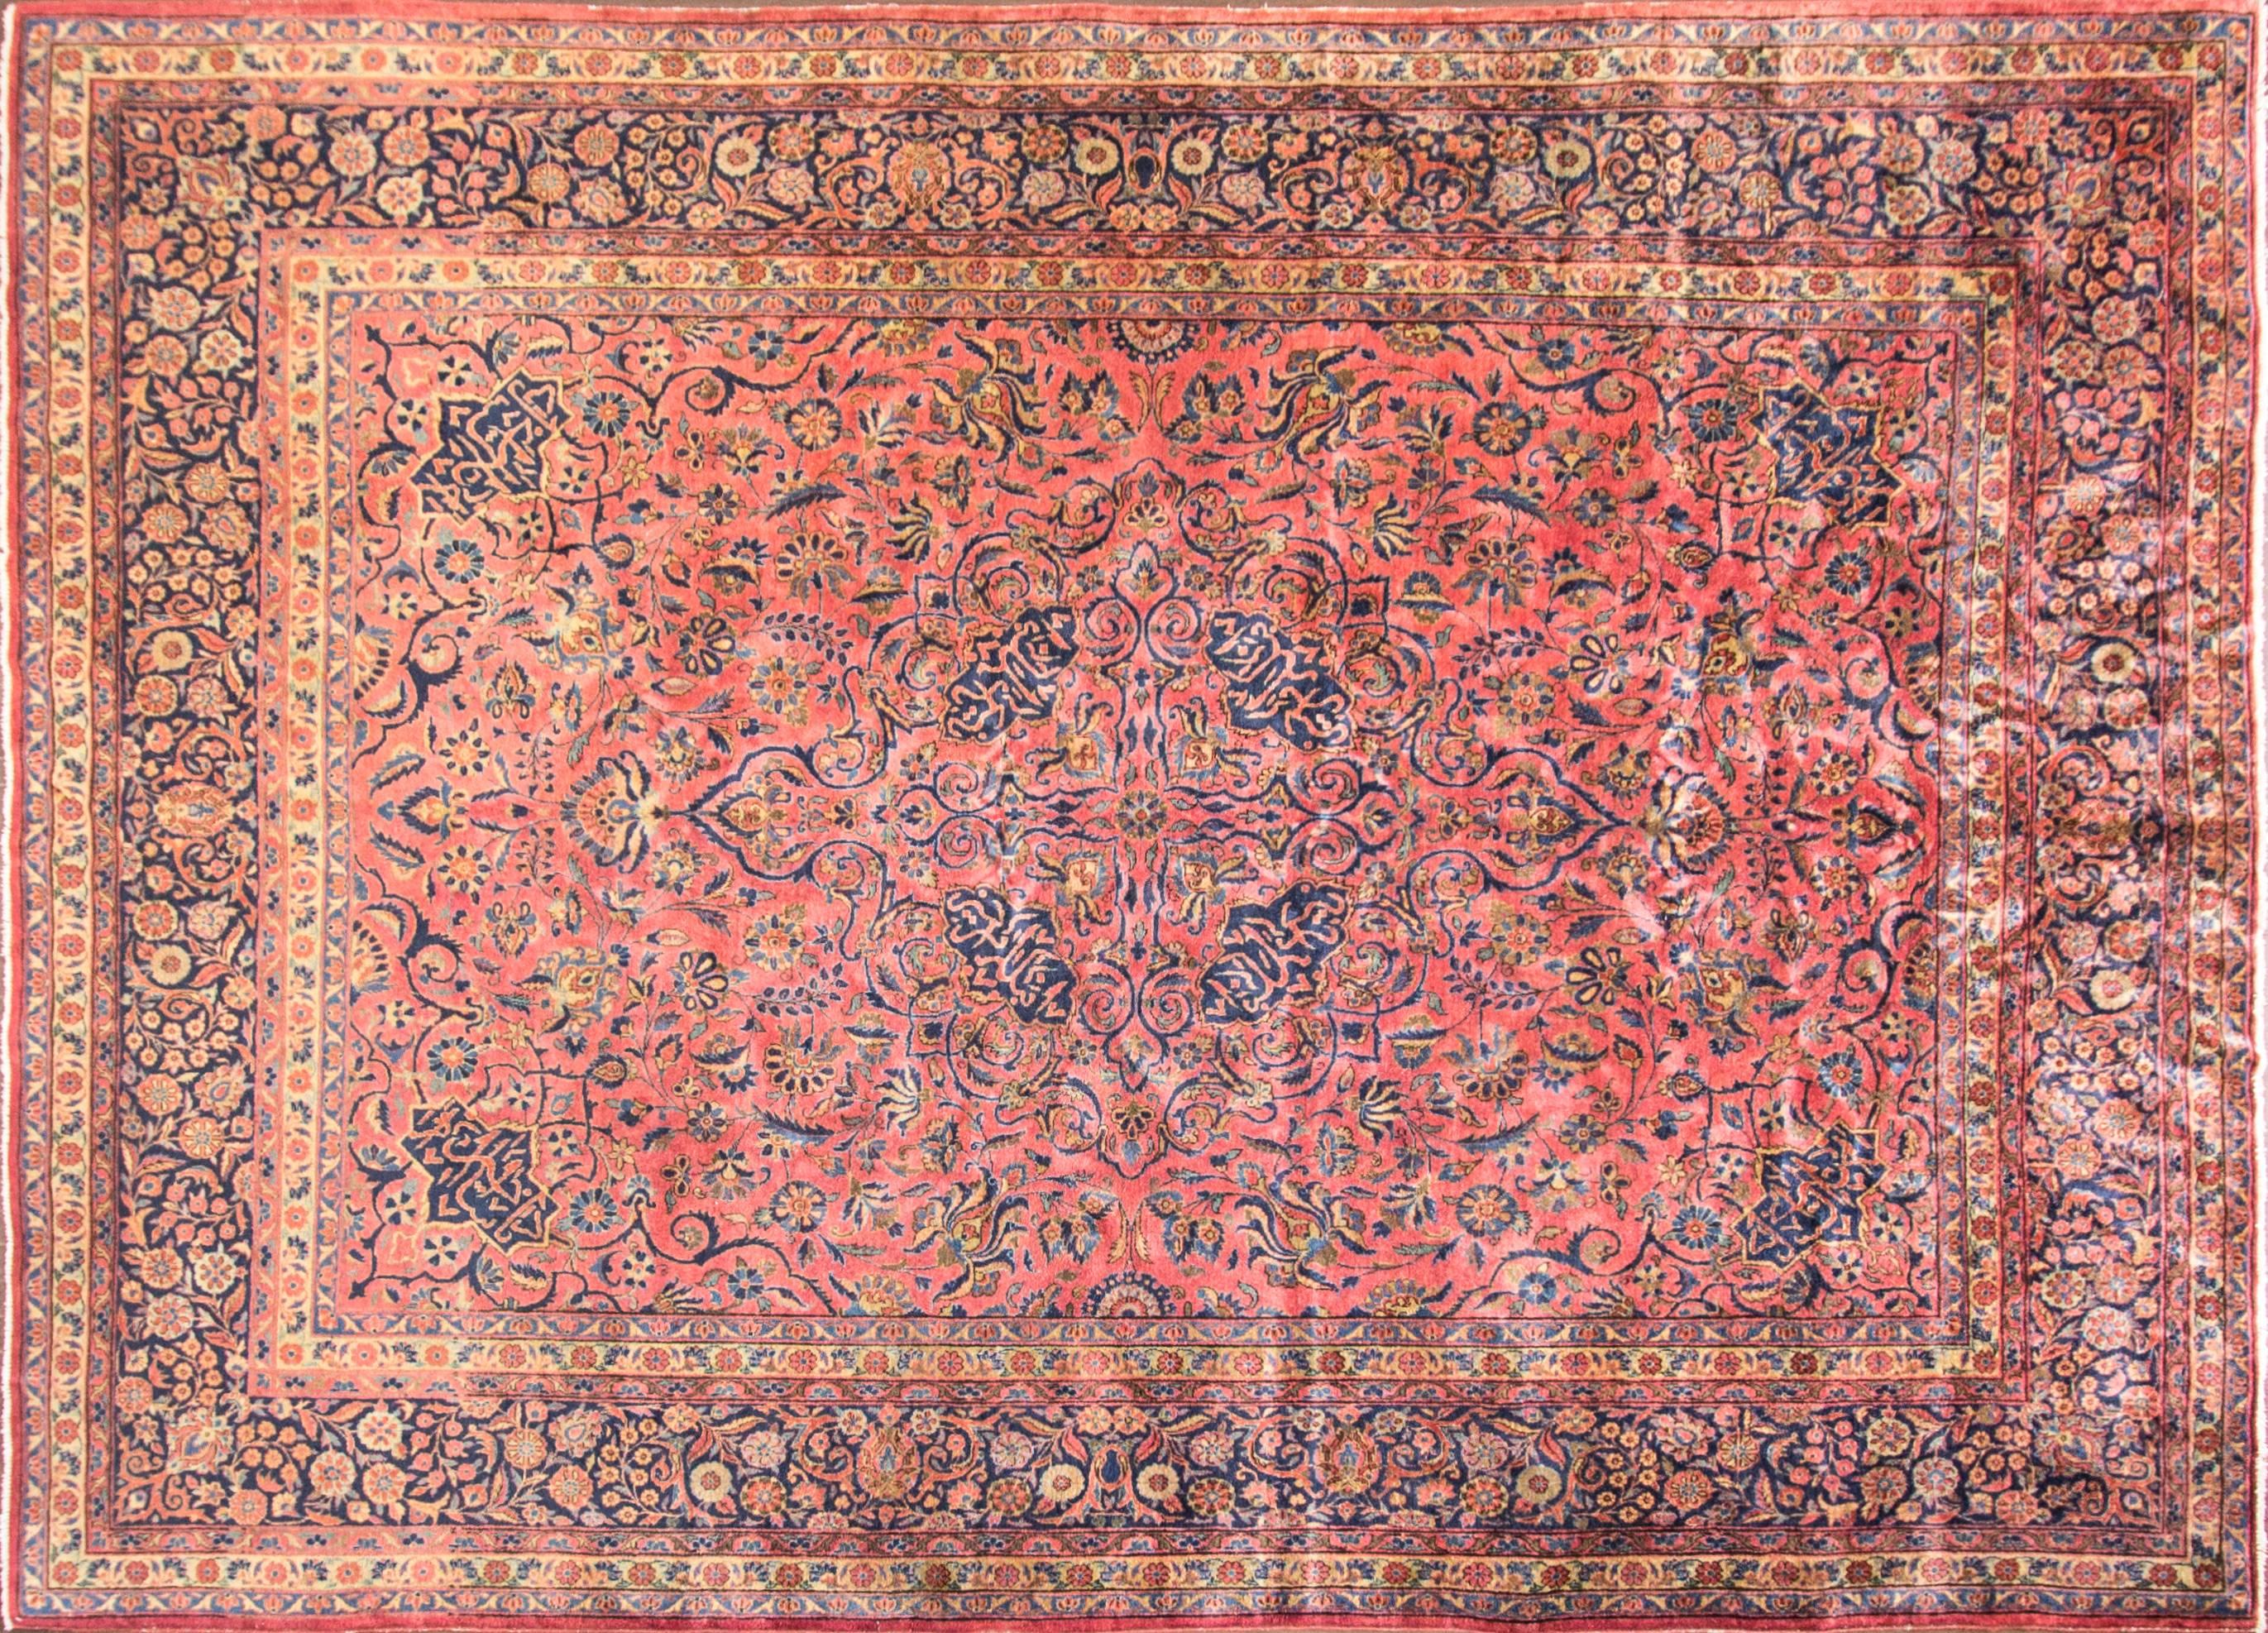 Ask for dealer shipping.
A Kashan rug made in Persia in the city of Kashan in Isfahan Province North Central Iran. There was production of Persian carpet at Royal workshops in the 17th and early 18th century. The Persian carpet workshops ceased